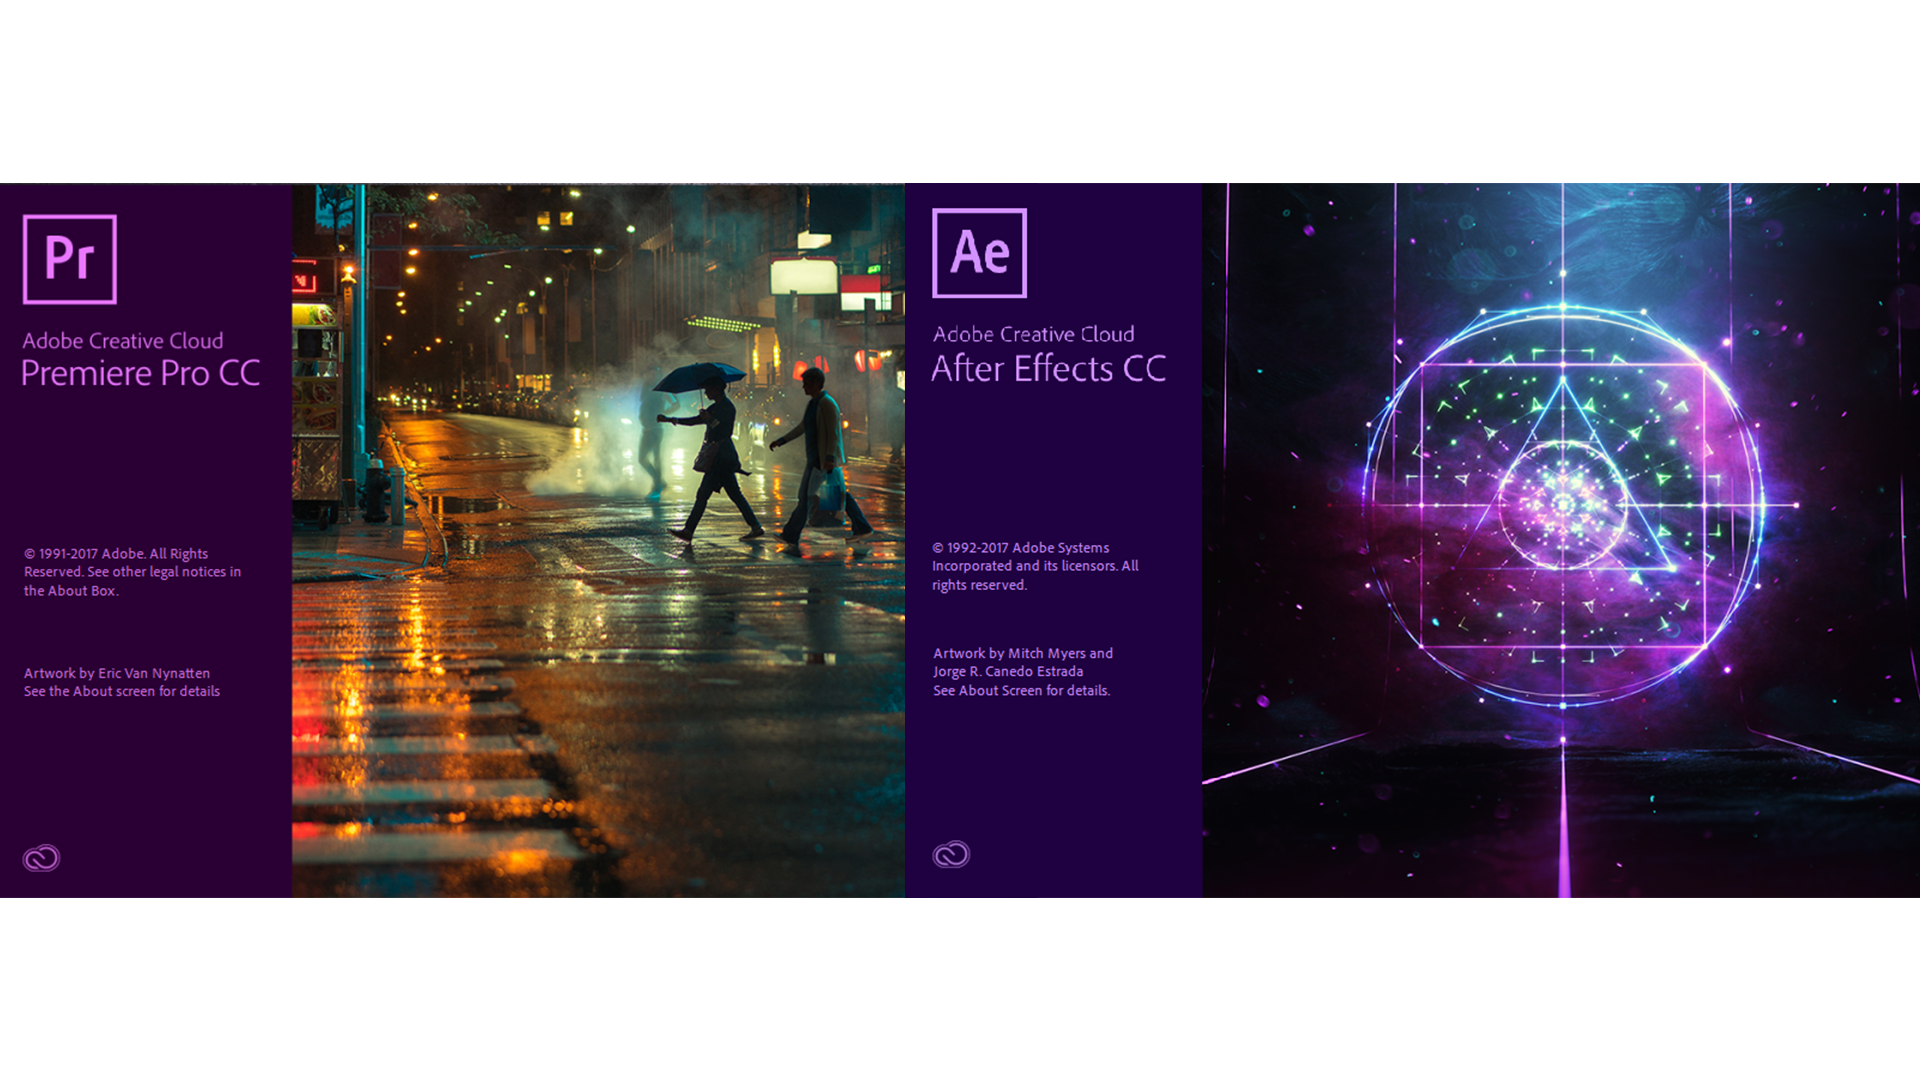 what versions os x is adobe after effects cs6” 11.0 compatible with